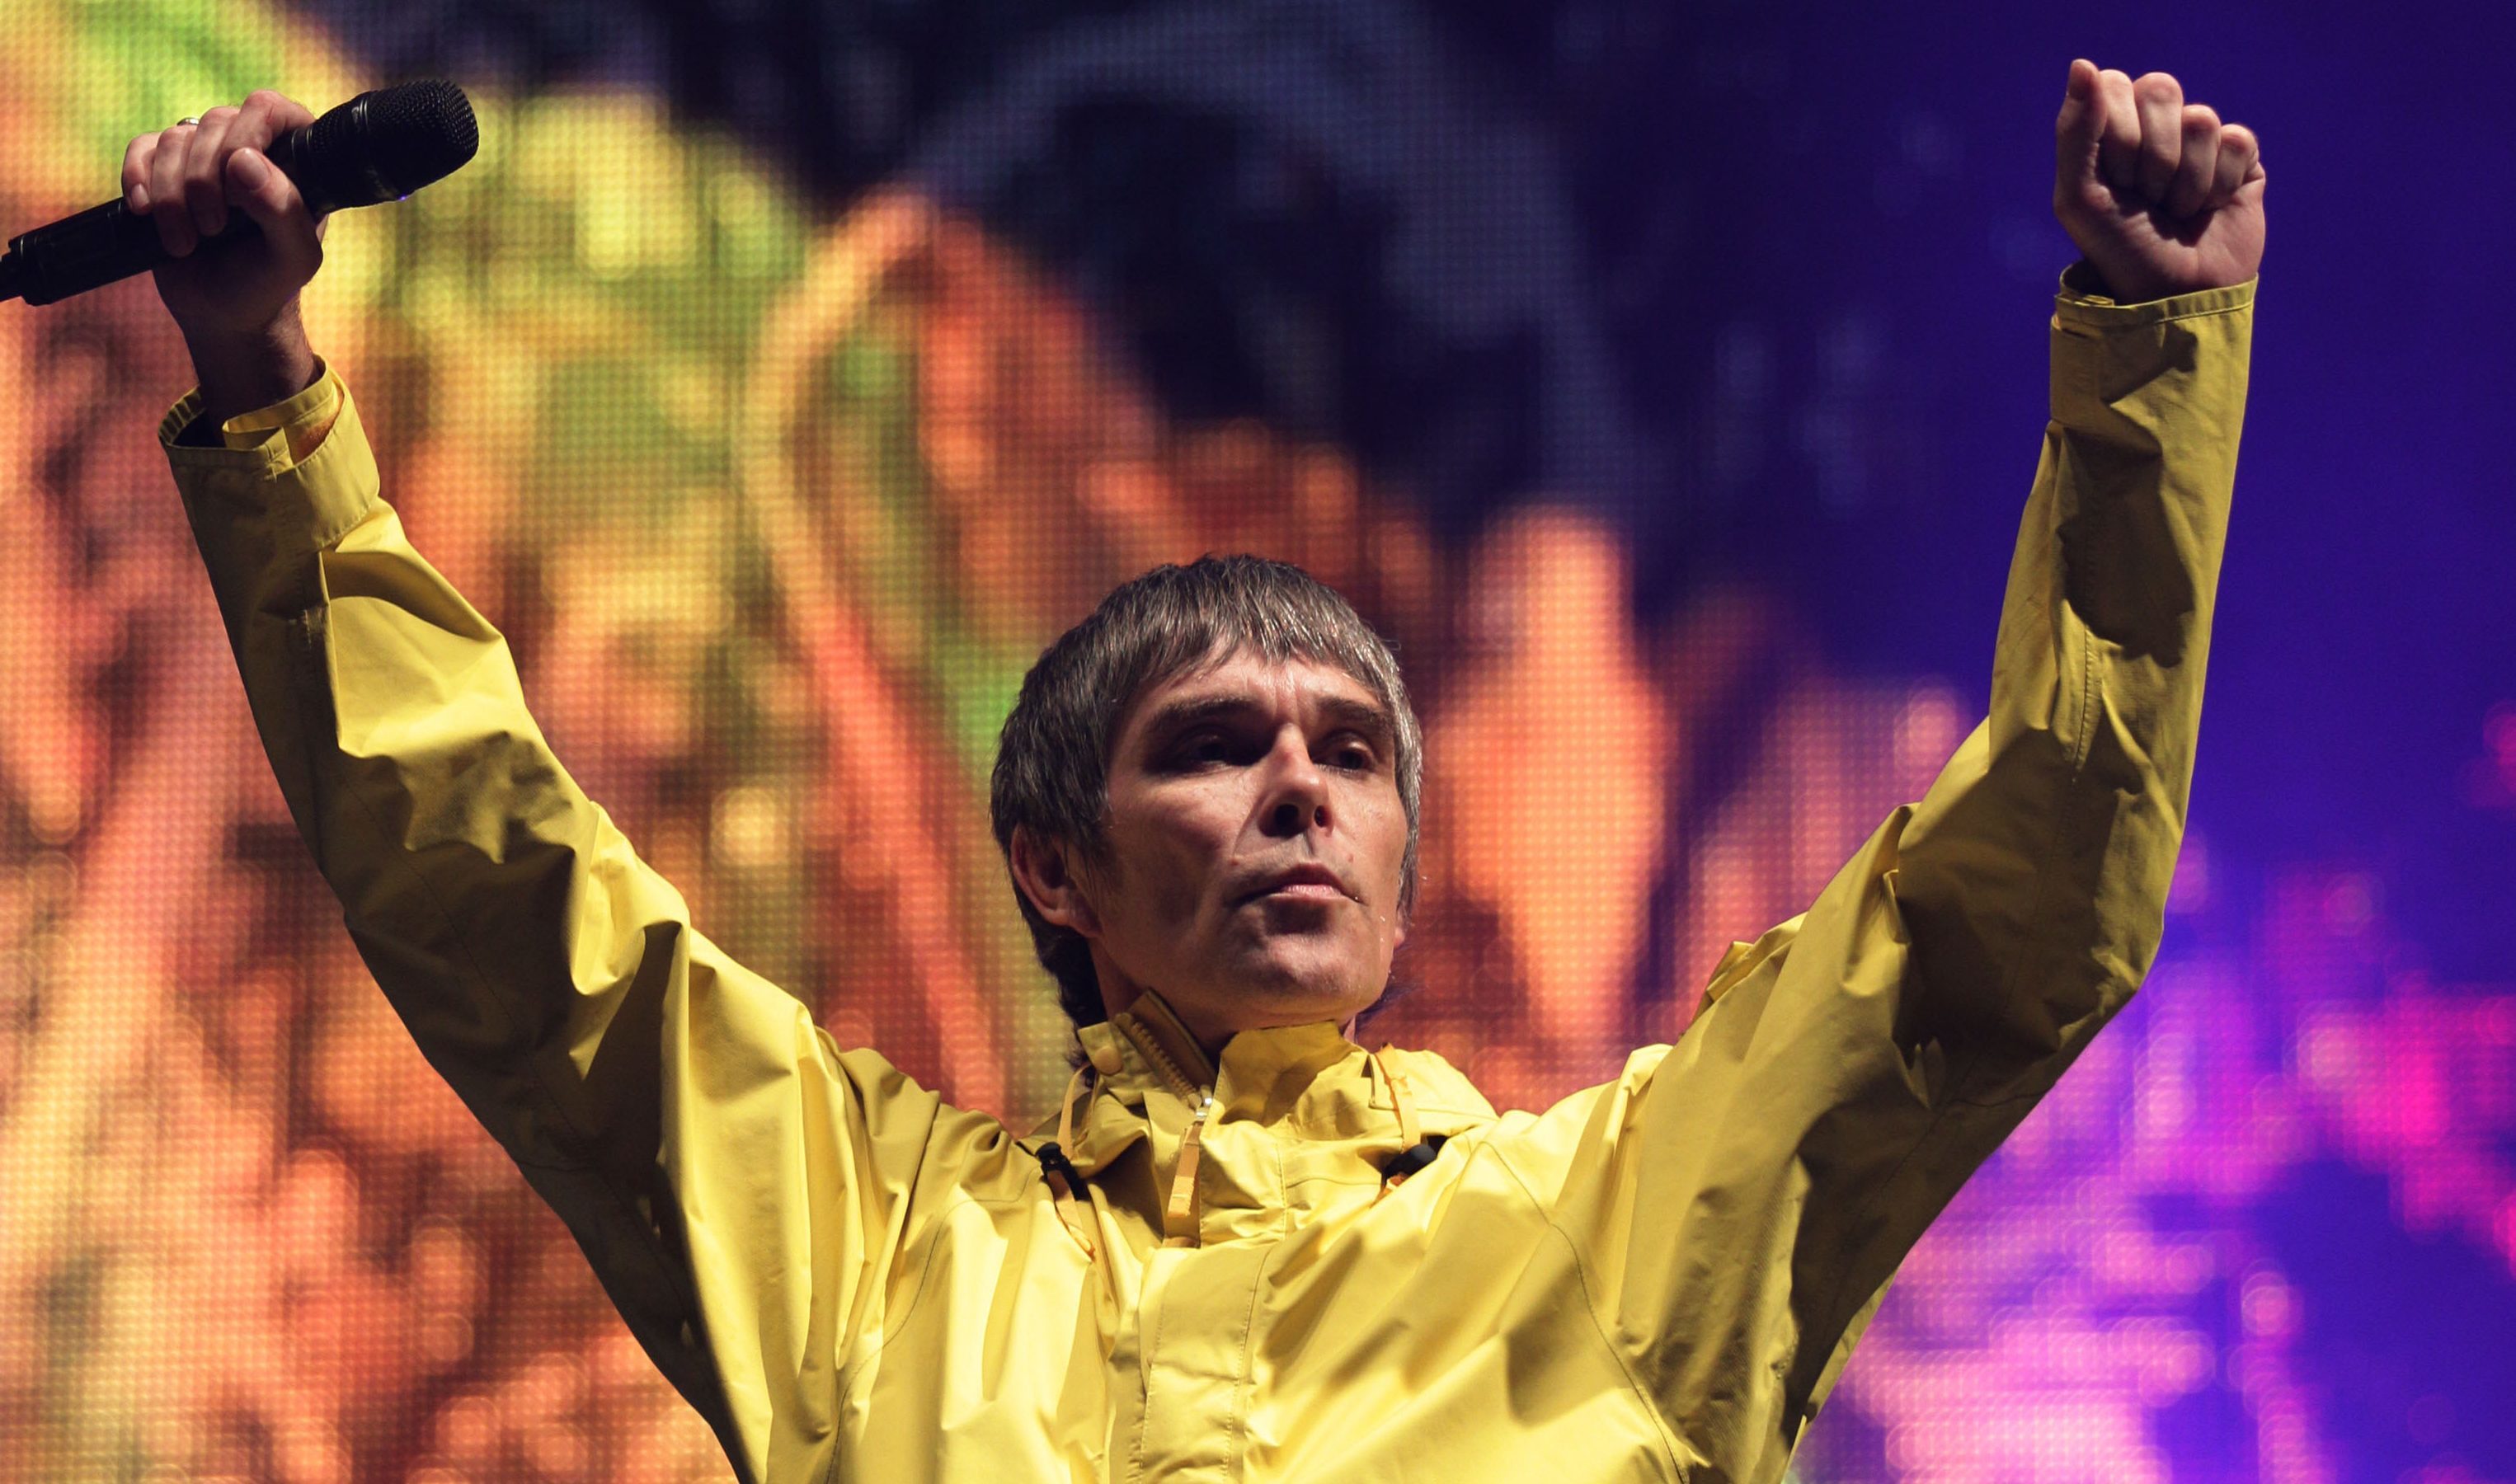 T in the Park headliners Stone Roses could be enjoying some fun in the Perthshire sun.